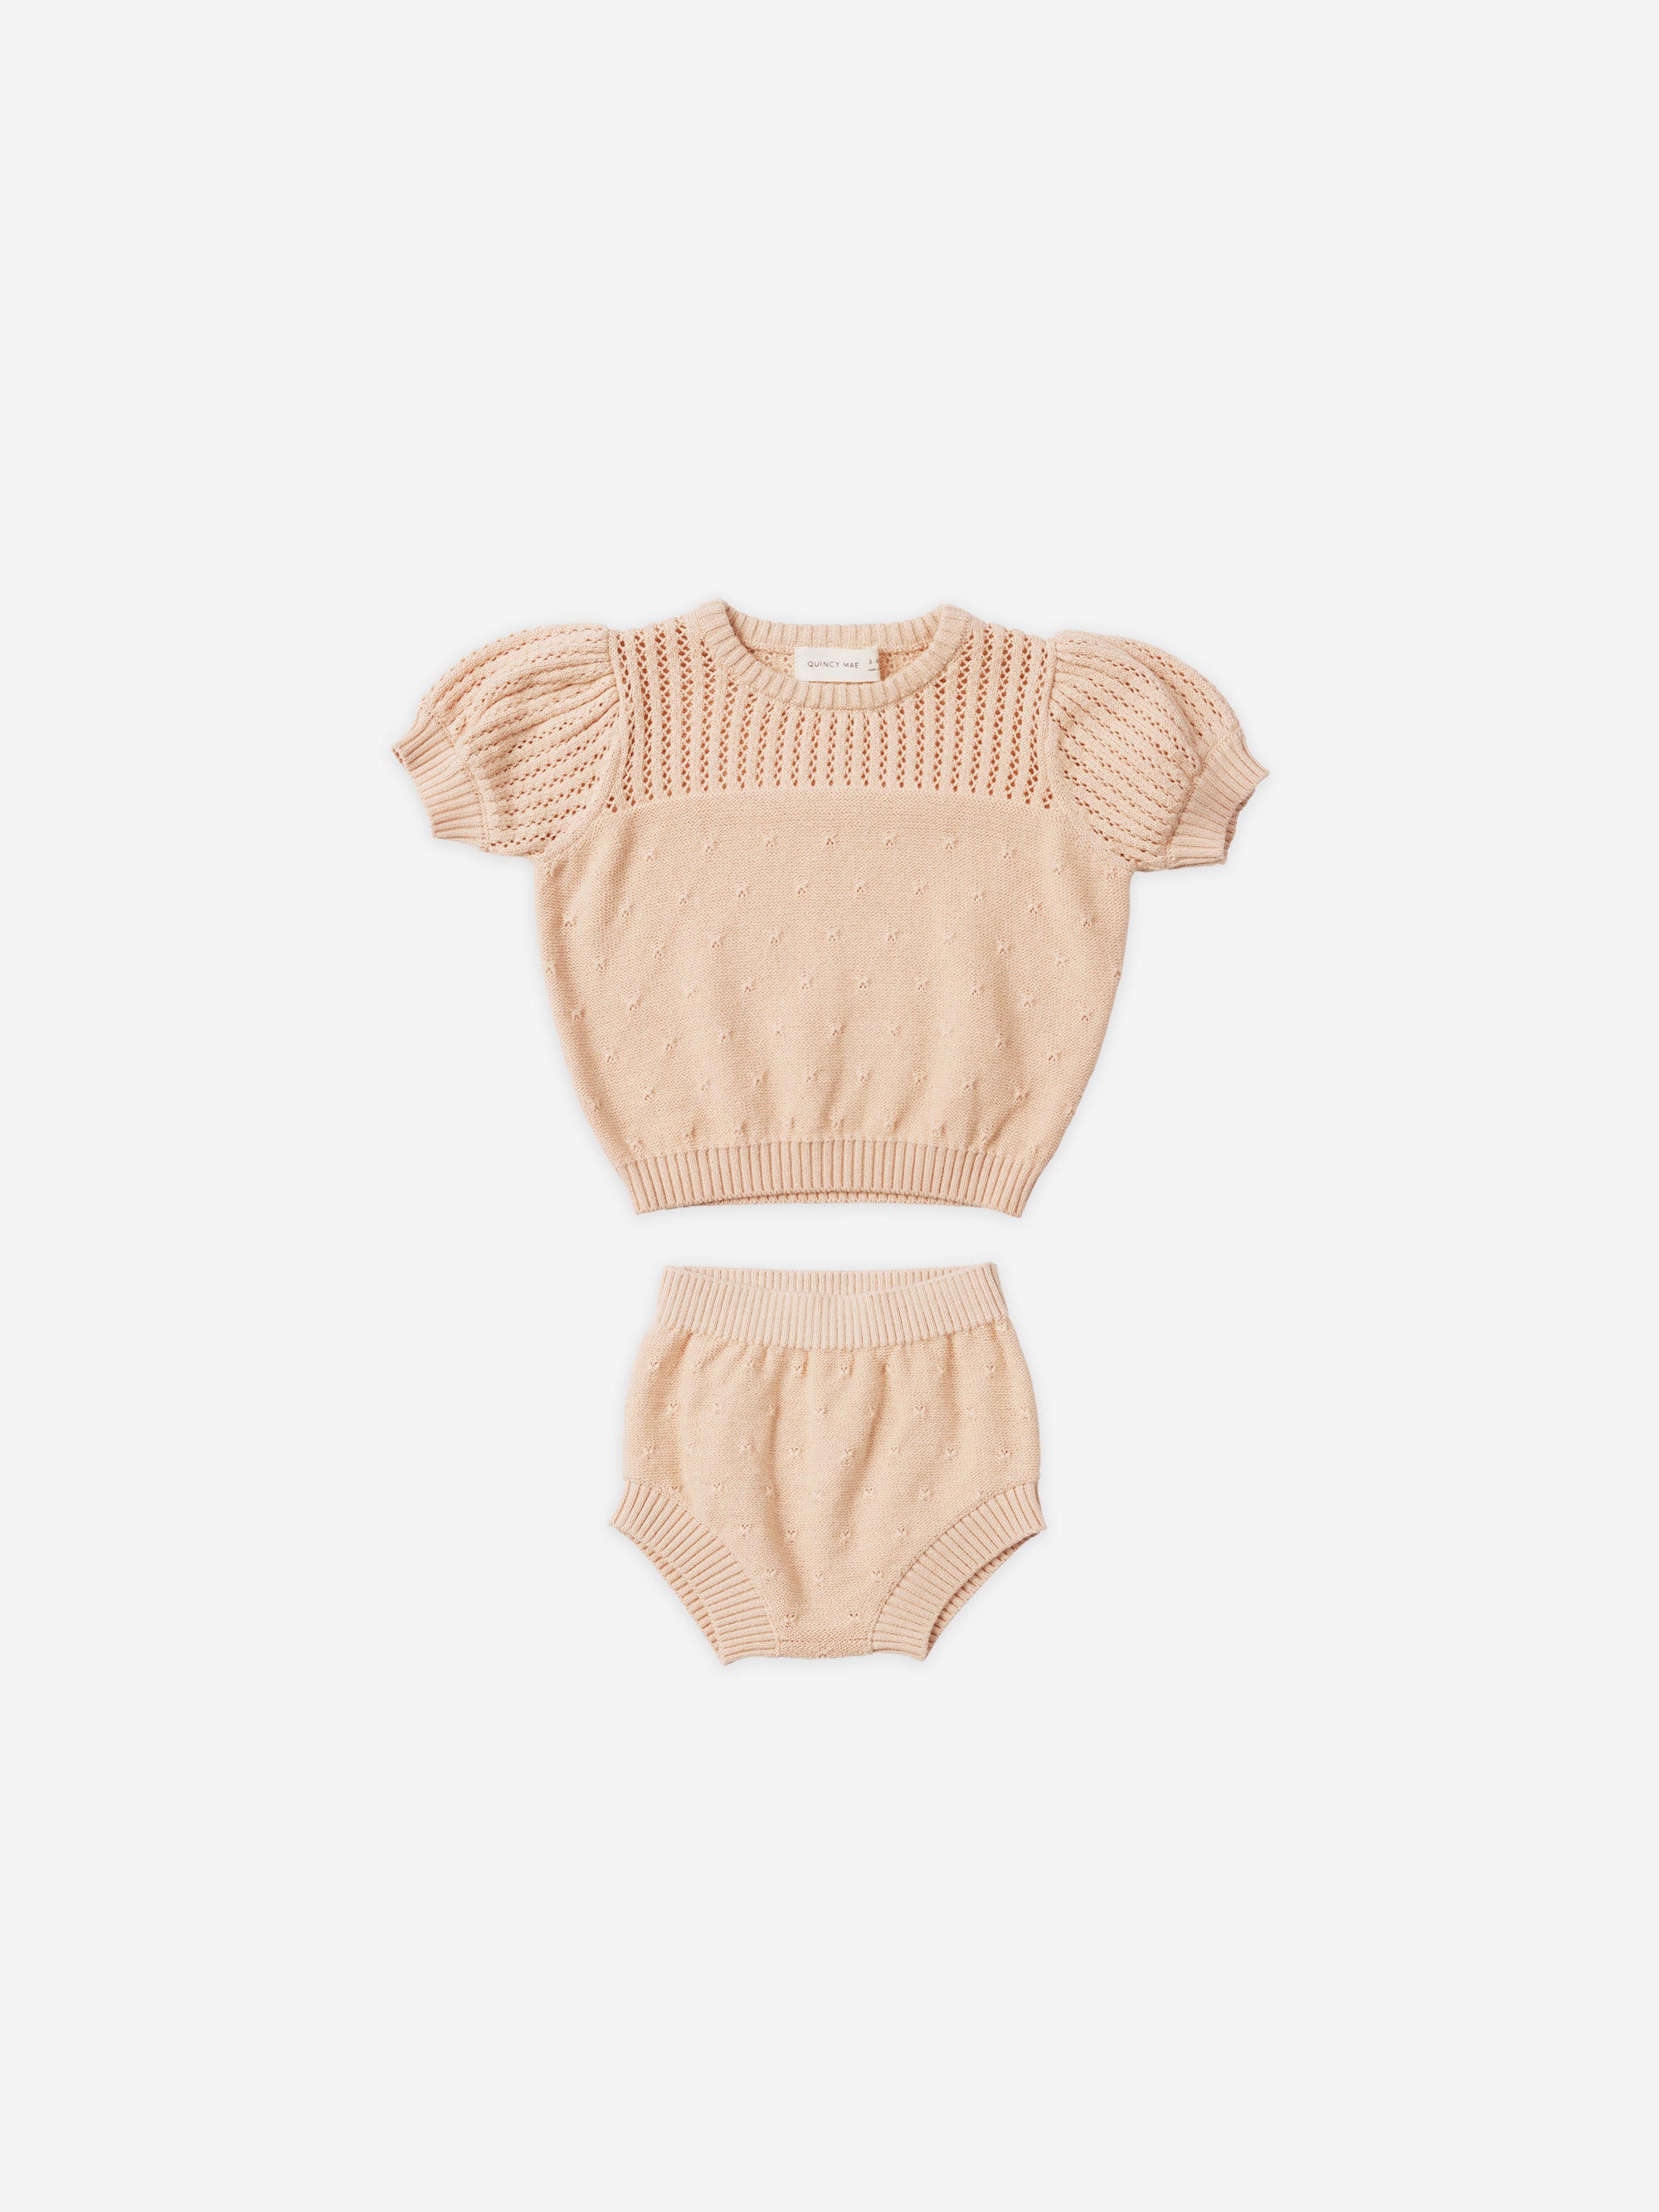 Pointelle Knit Set || Shell - Rylee + Cru | Kids Clothes | Trendy Baby Clothes | Modern Infant Outfits |